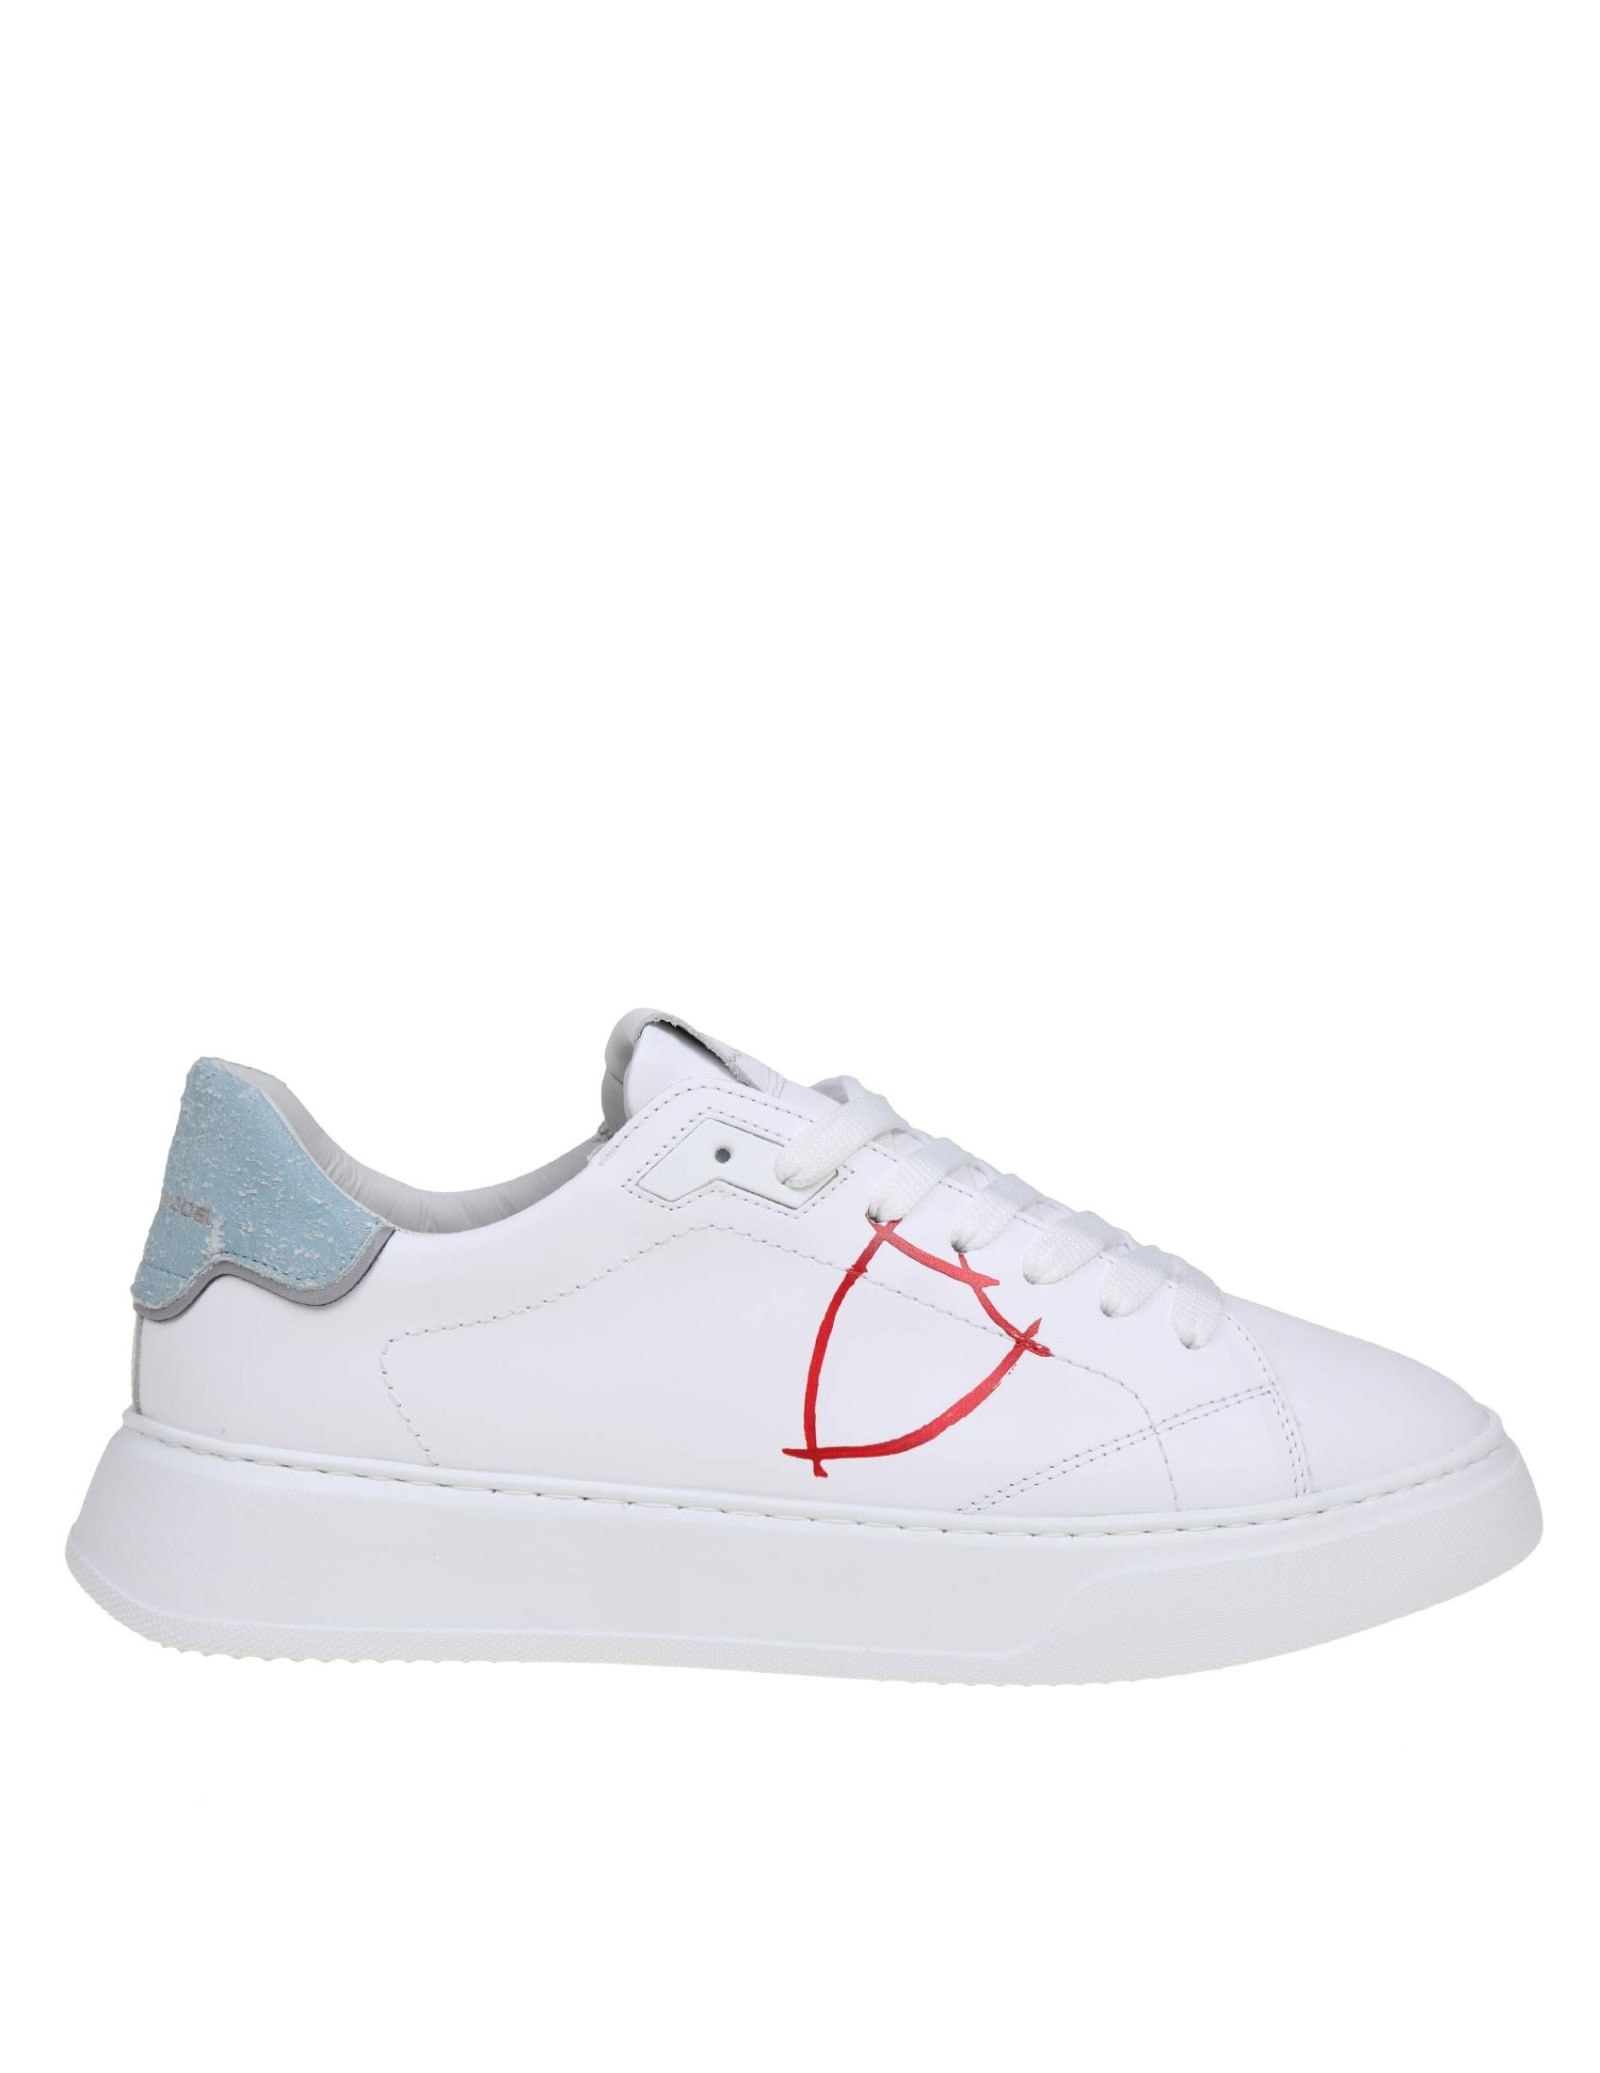 Shop Philippe Model Temple Low Sneakers In White And Light Blue Leather In White/red